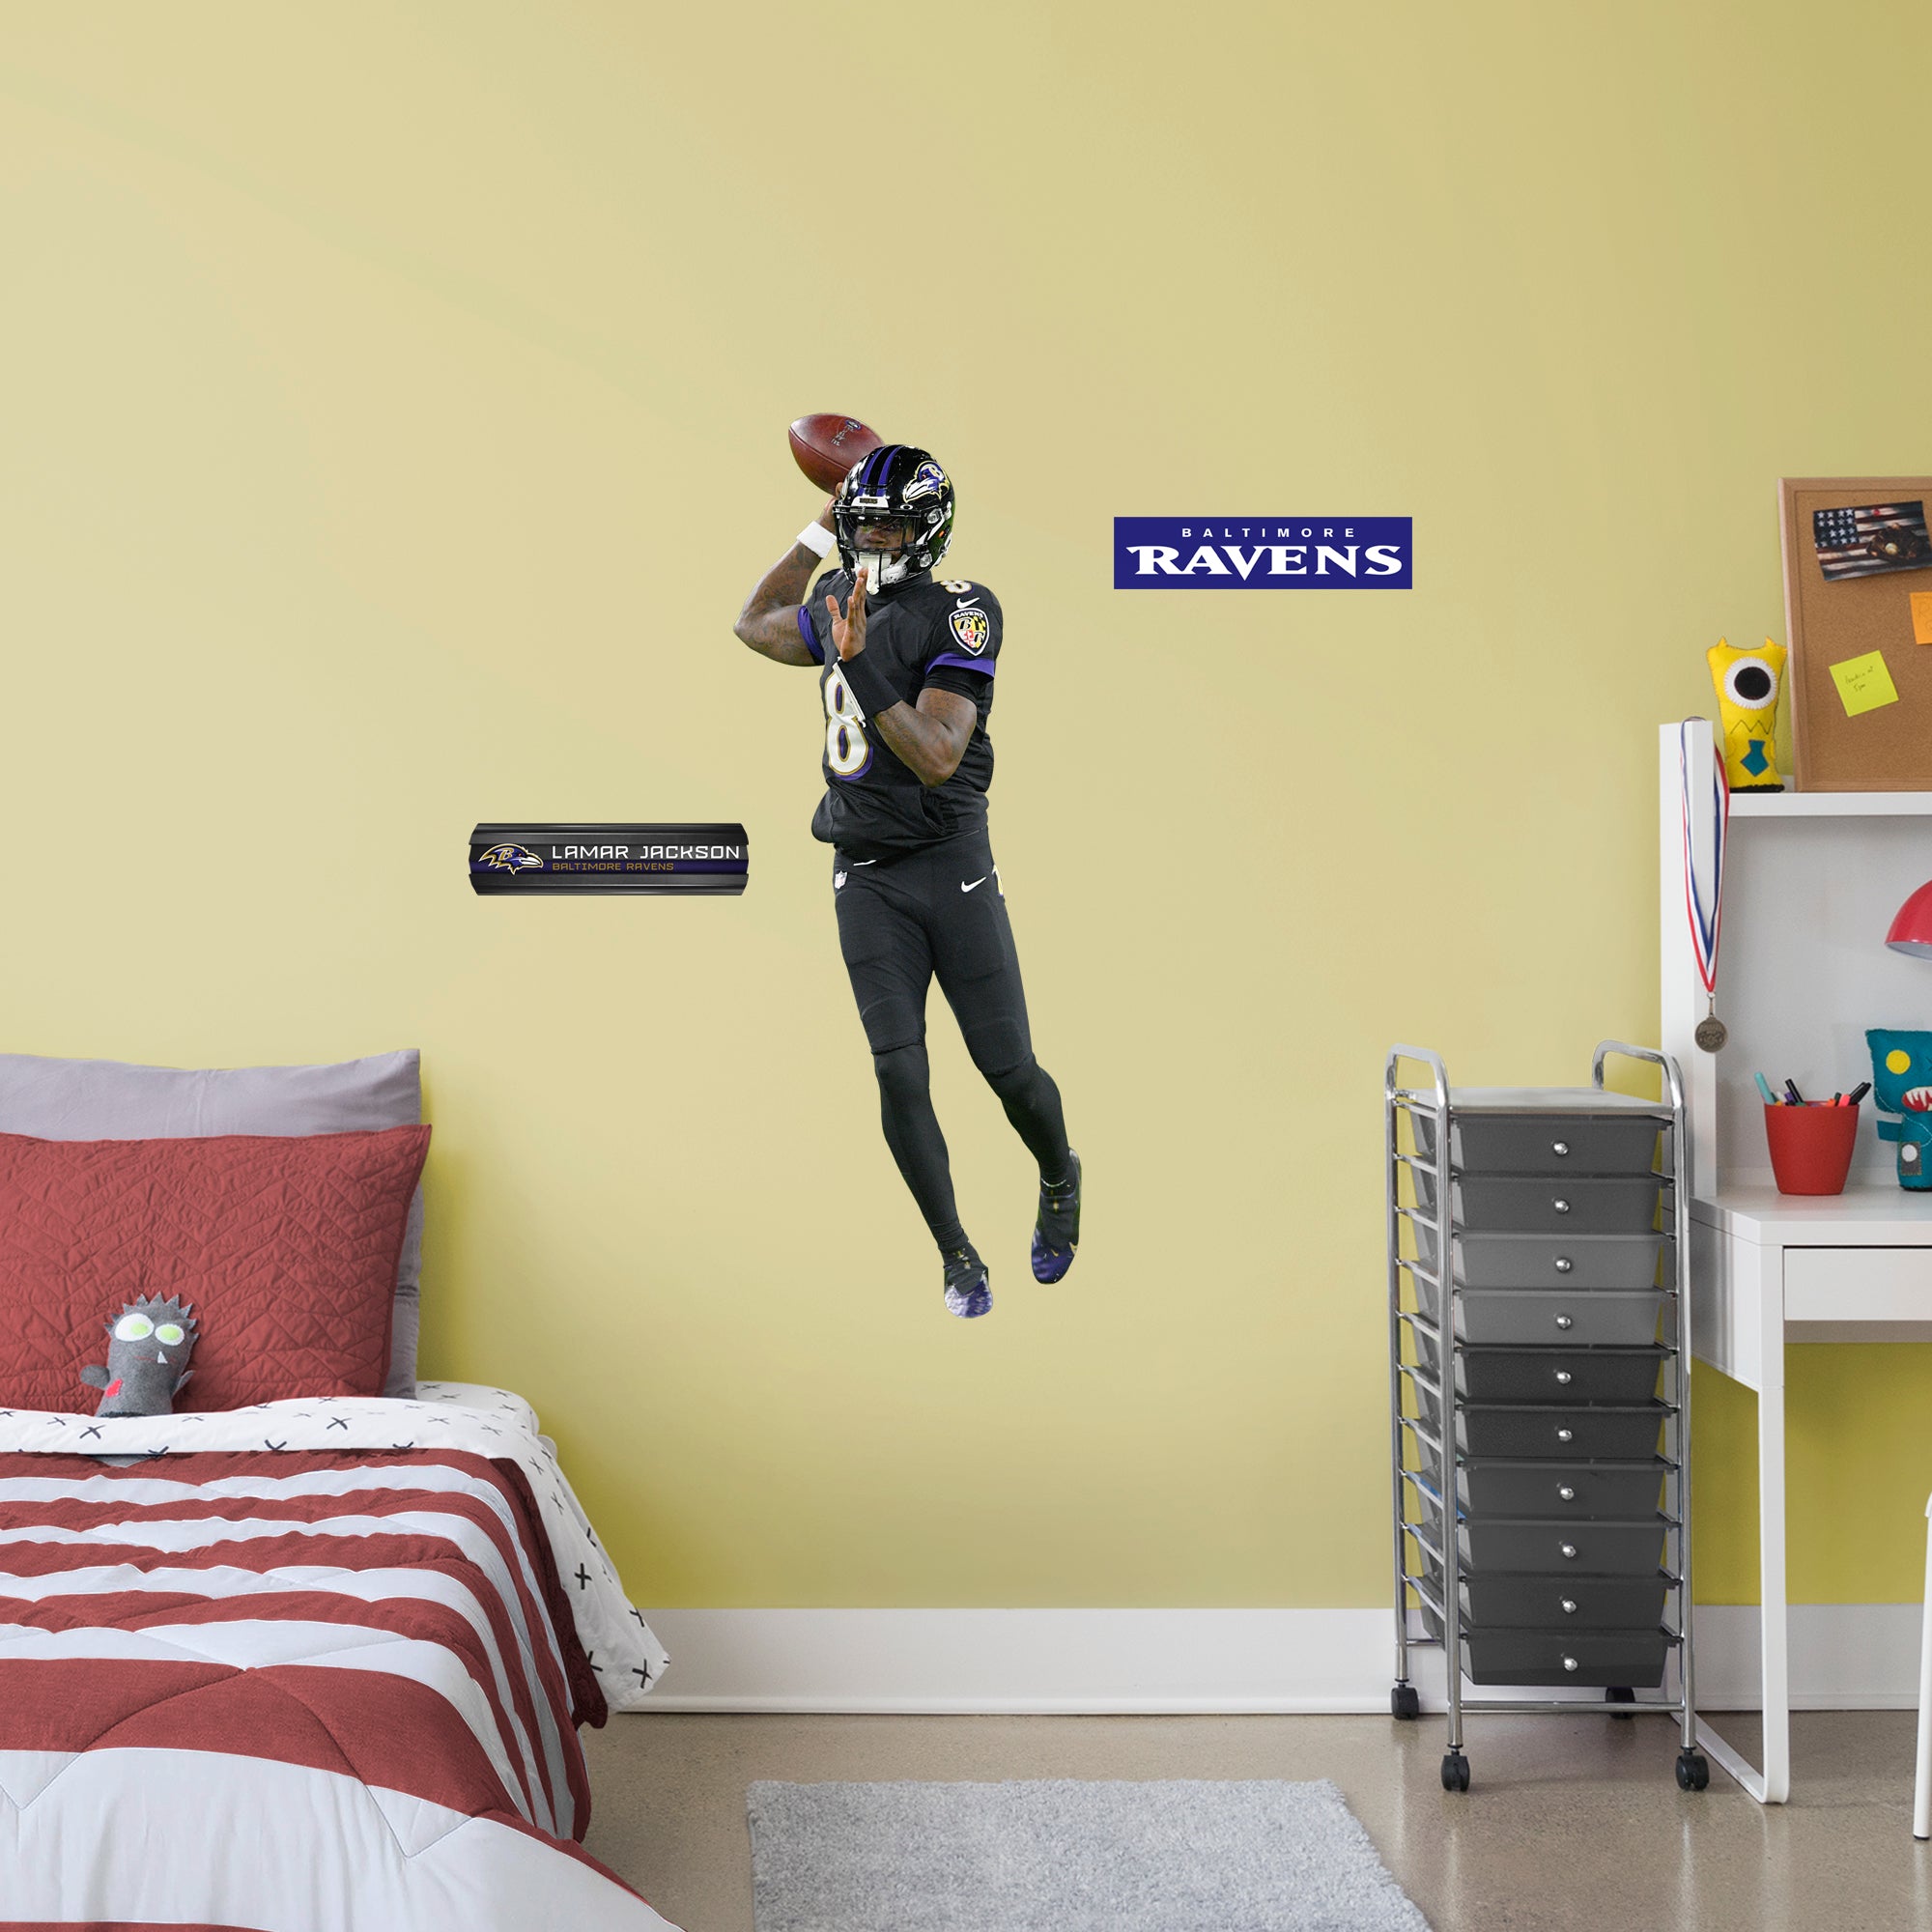 Lamar Jackson 2020 Black Jersey - Officially Licensed NFL Removable Wall Decal Giant Athlete + 2 Decals (19"W x 50"H) by Fathead